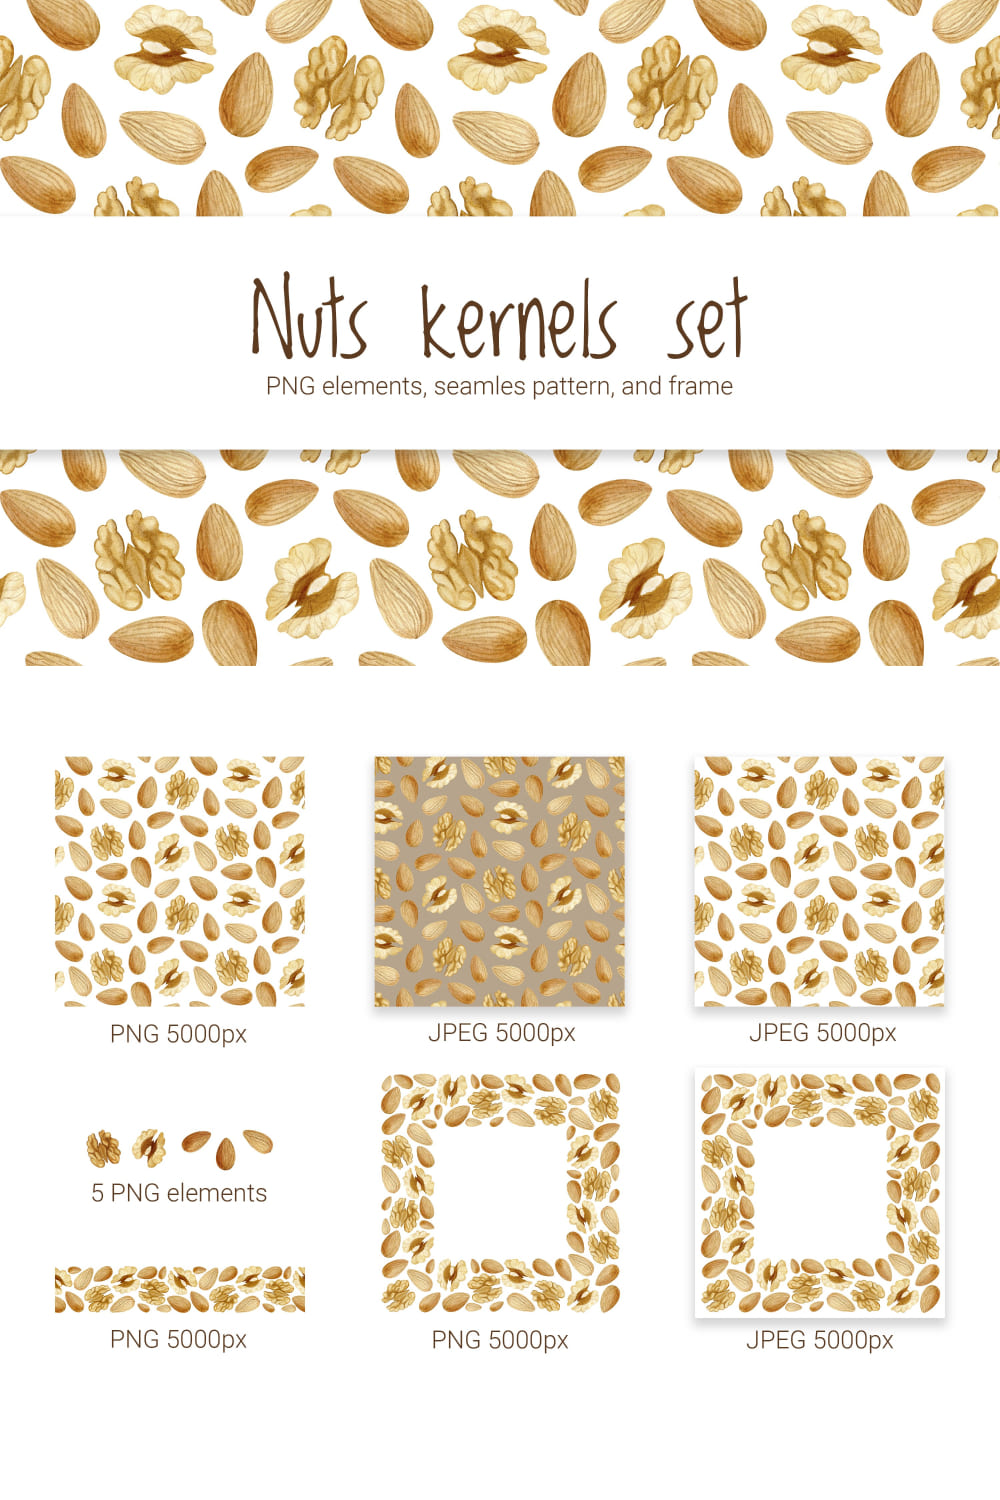 03 hand drawn nuts kernels set seamless pattern and frame 1000x1500 293